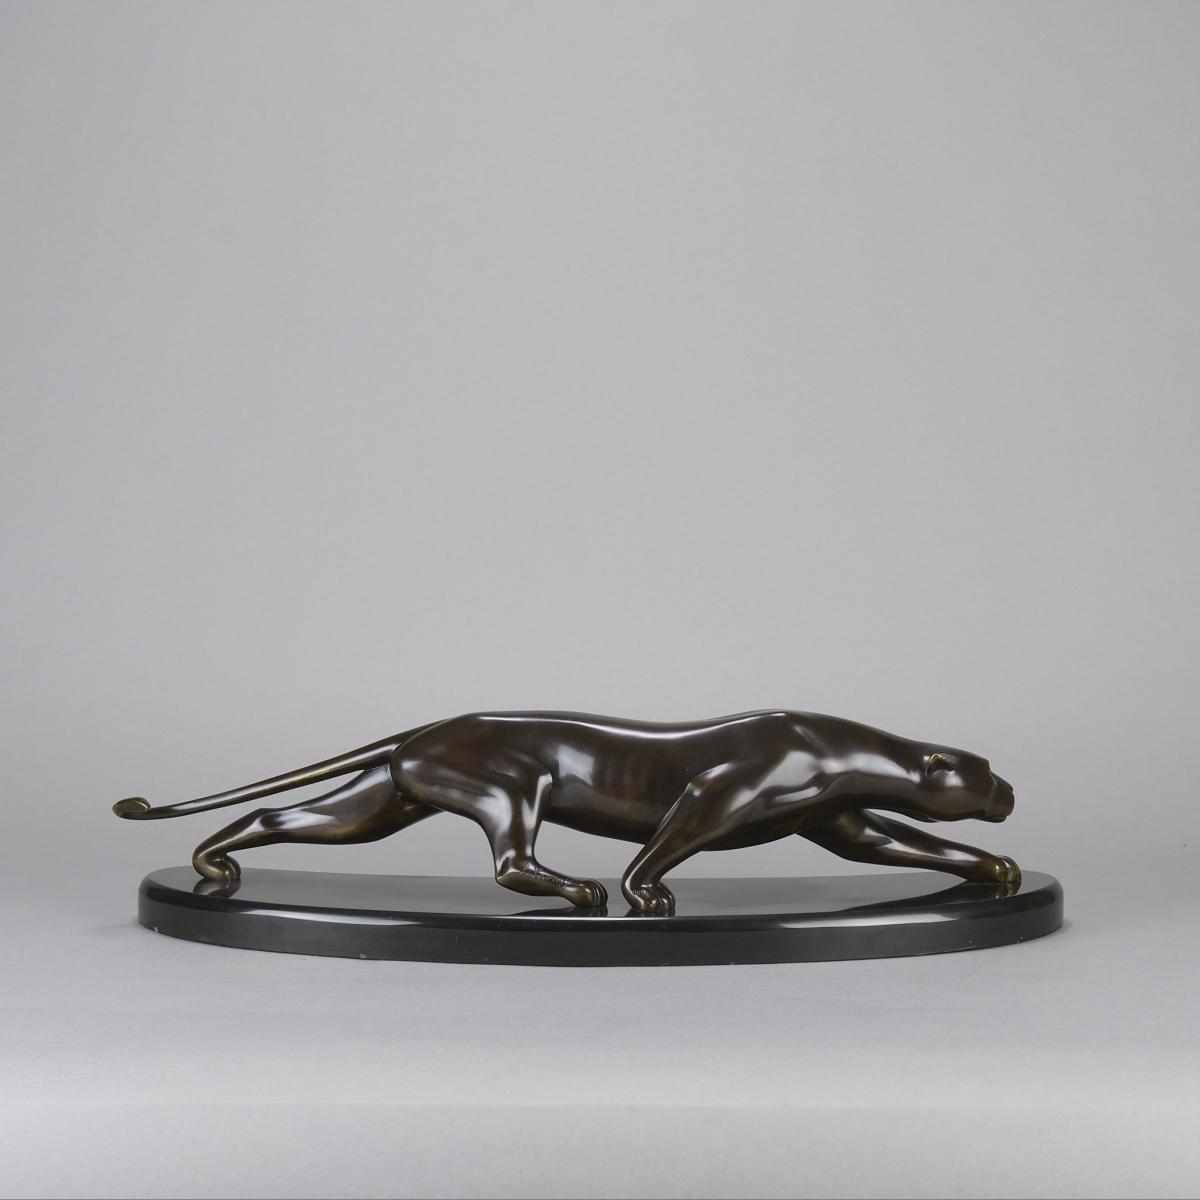 Early 20th Century Art Deco Bronze Sculpture "Panther" by Georges Lavroff